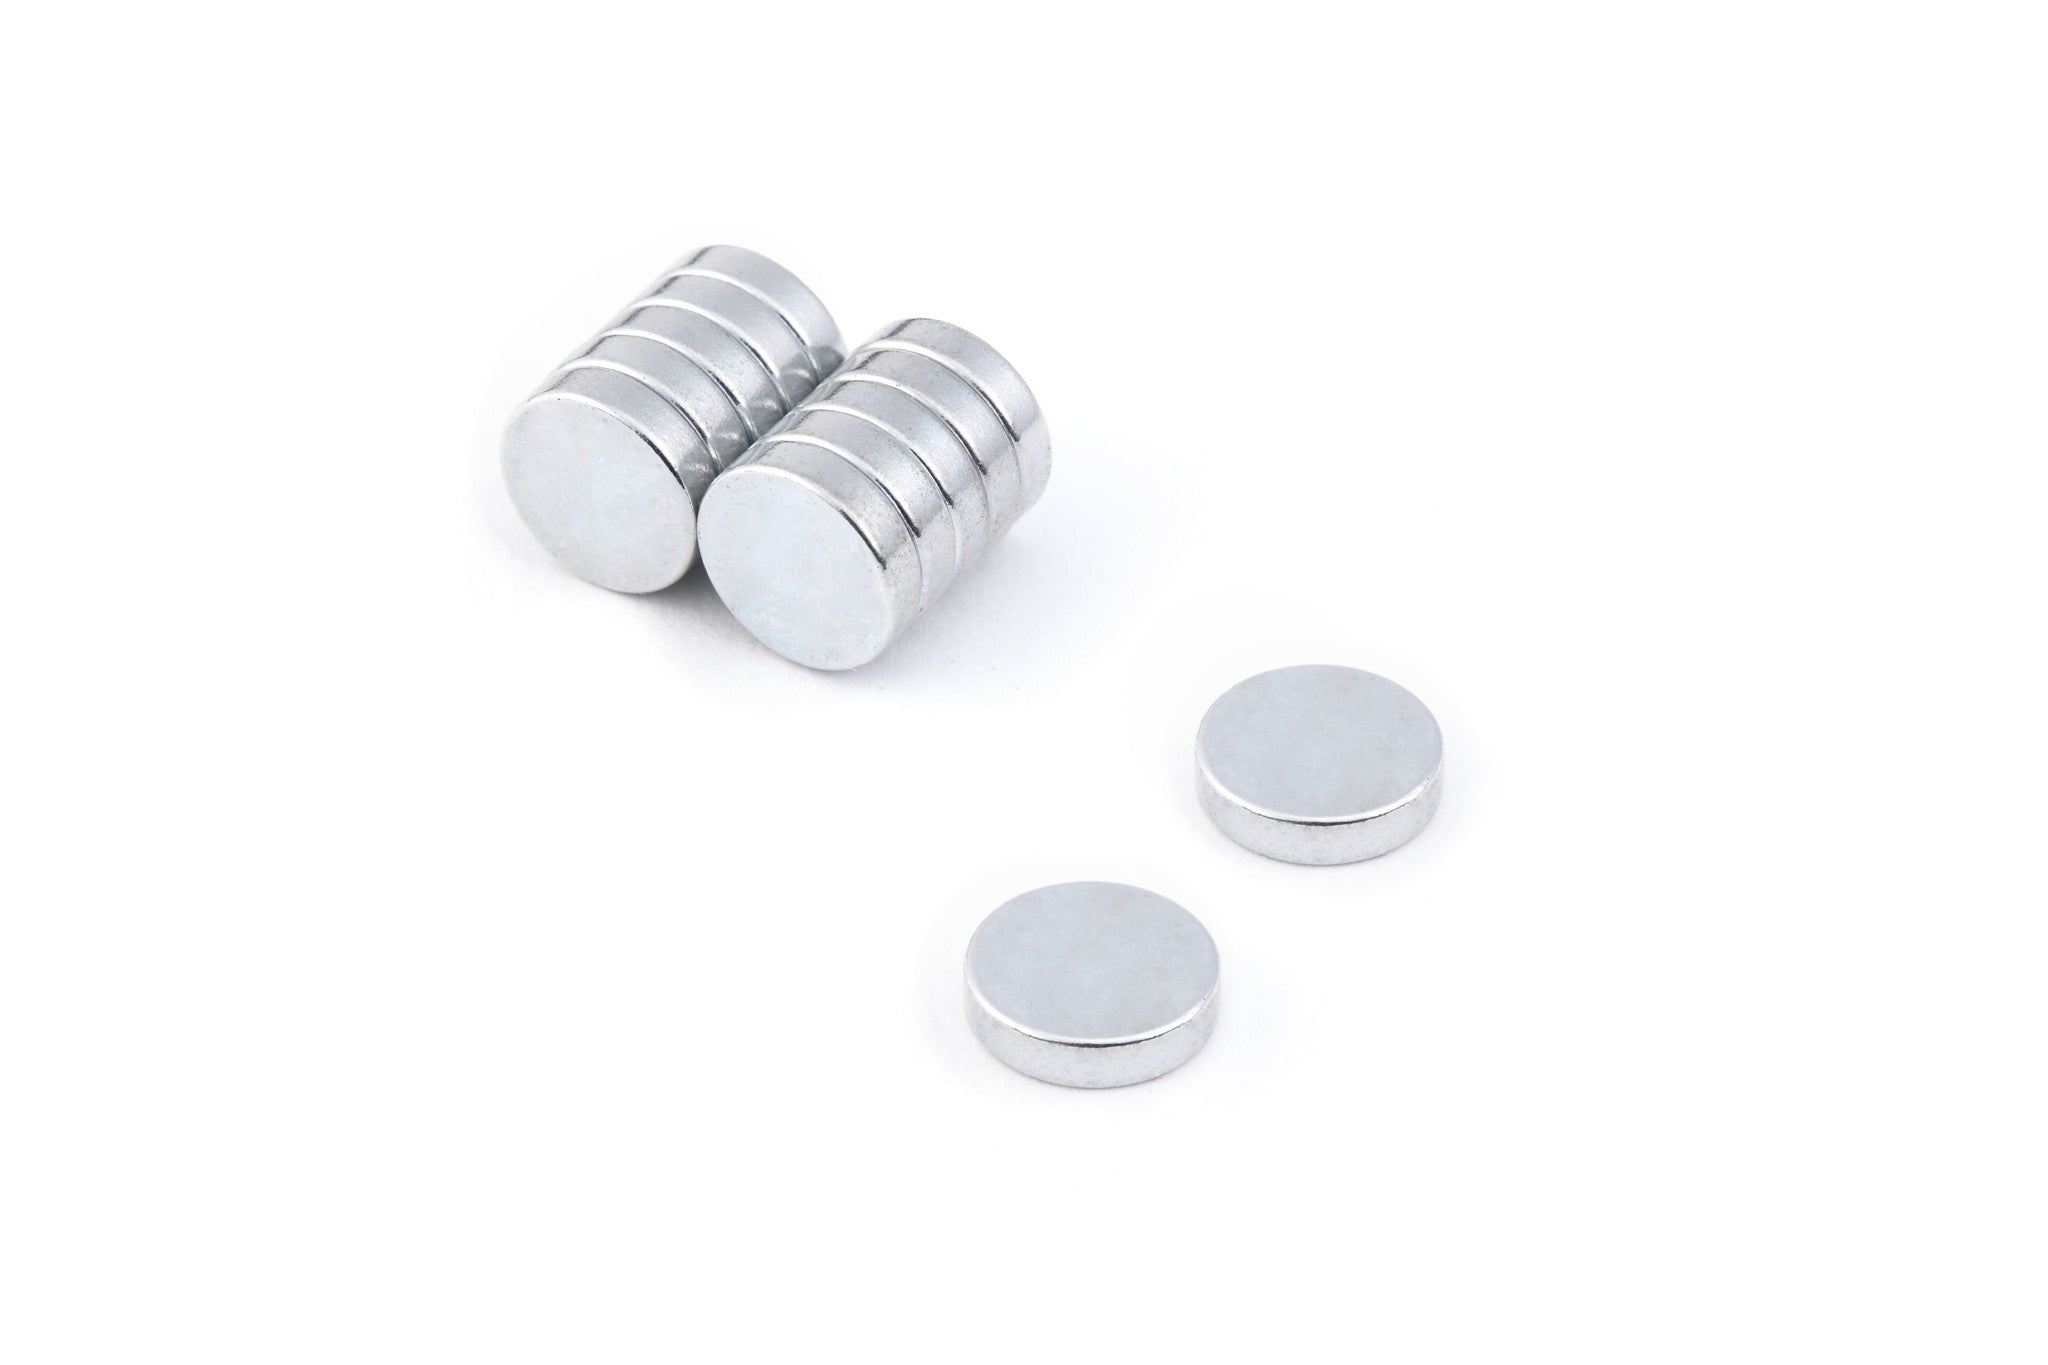 Additional Silver Magnets